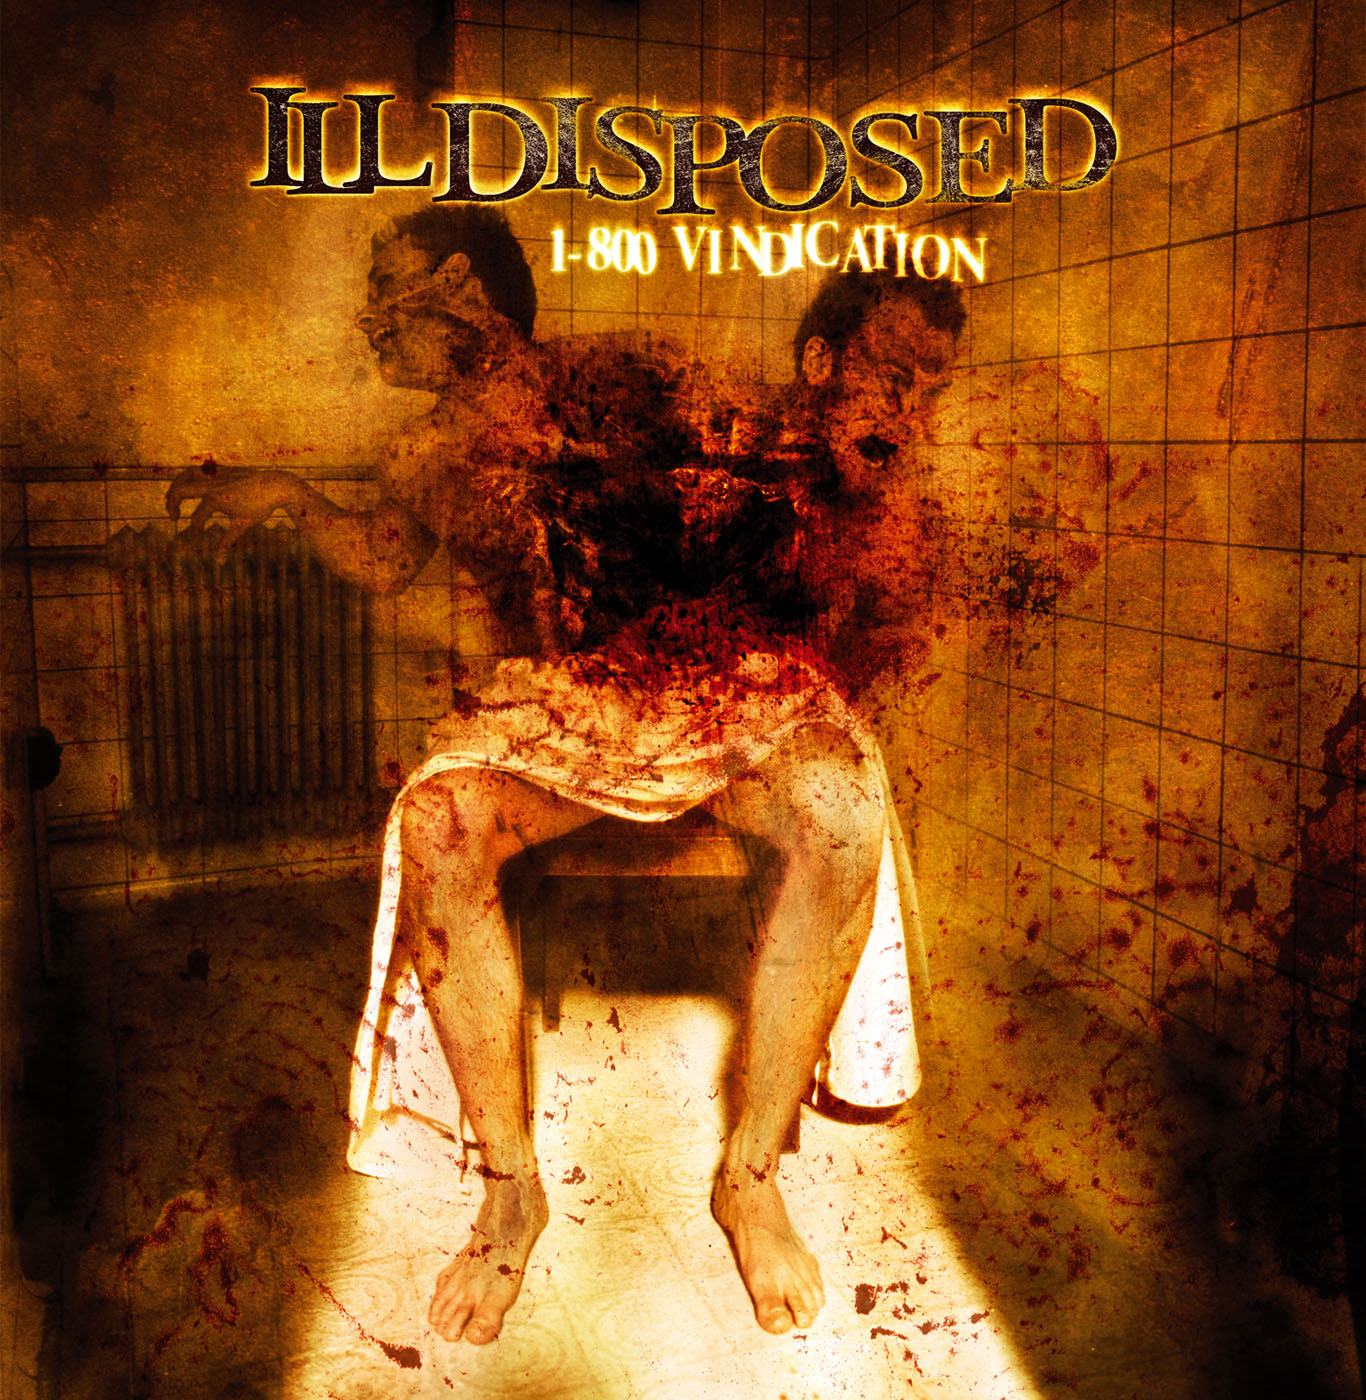 Illdisposed_1-800 Vindication-Cover